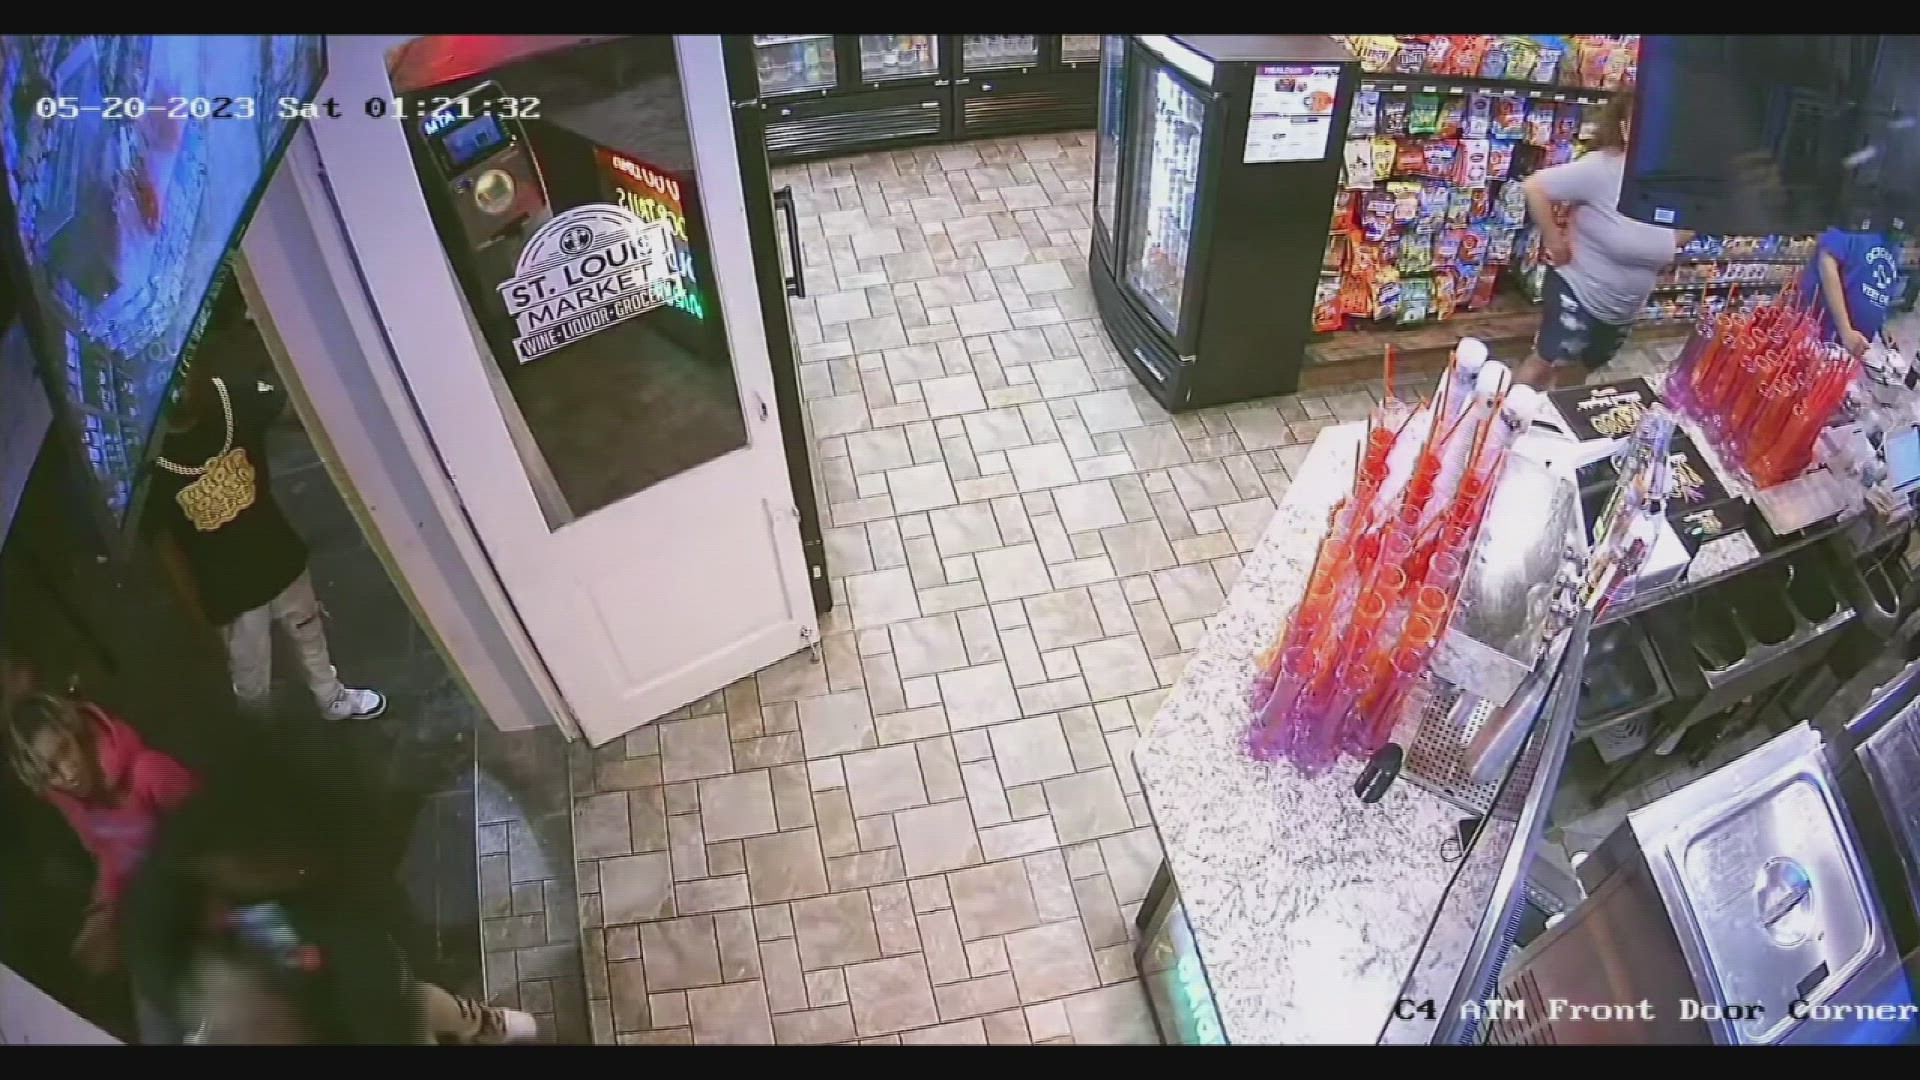 Police say the man attacked an employee at a convenience store